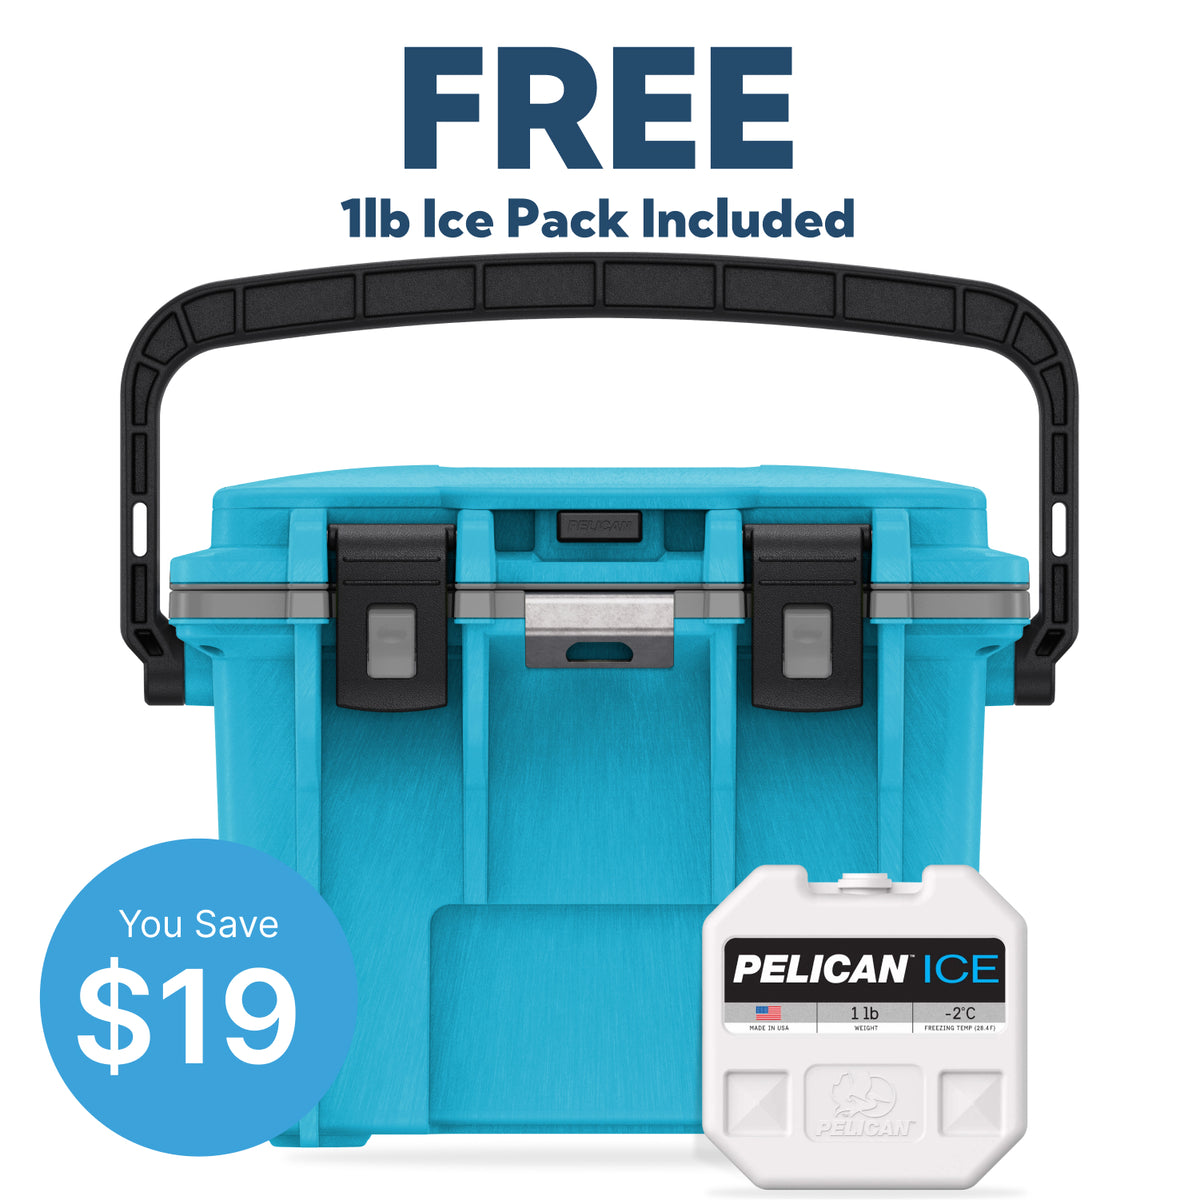 Cool Blue / Grey Pelican 14QT Personal Cooler with Free 1lb Ice Pack